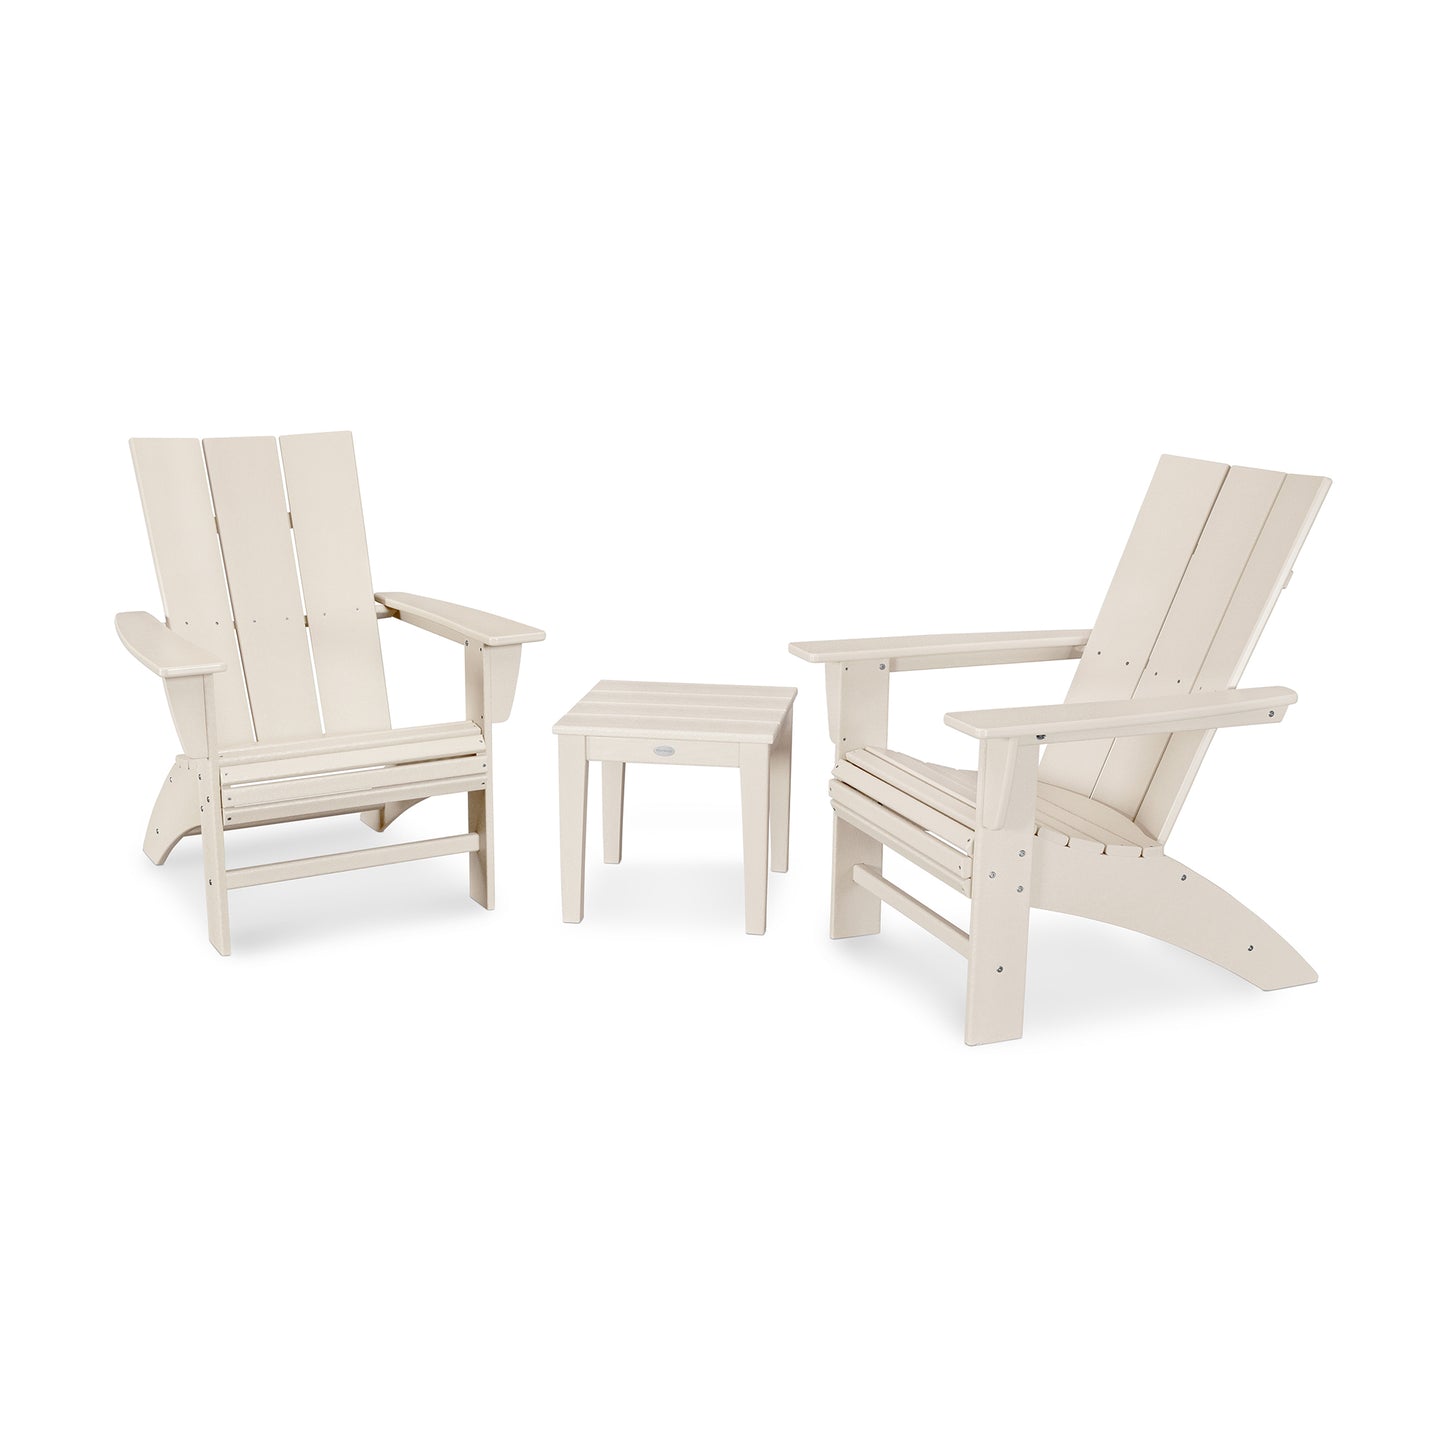 Two white POLYWOOD Modern Curveback Adirondack 3-Piece Set chairs facing each other with a small matching table in between, set against a plain white background.